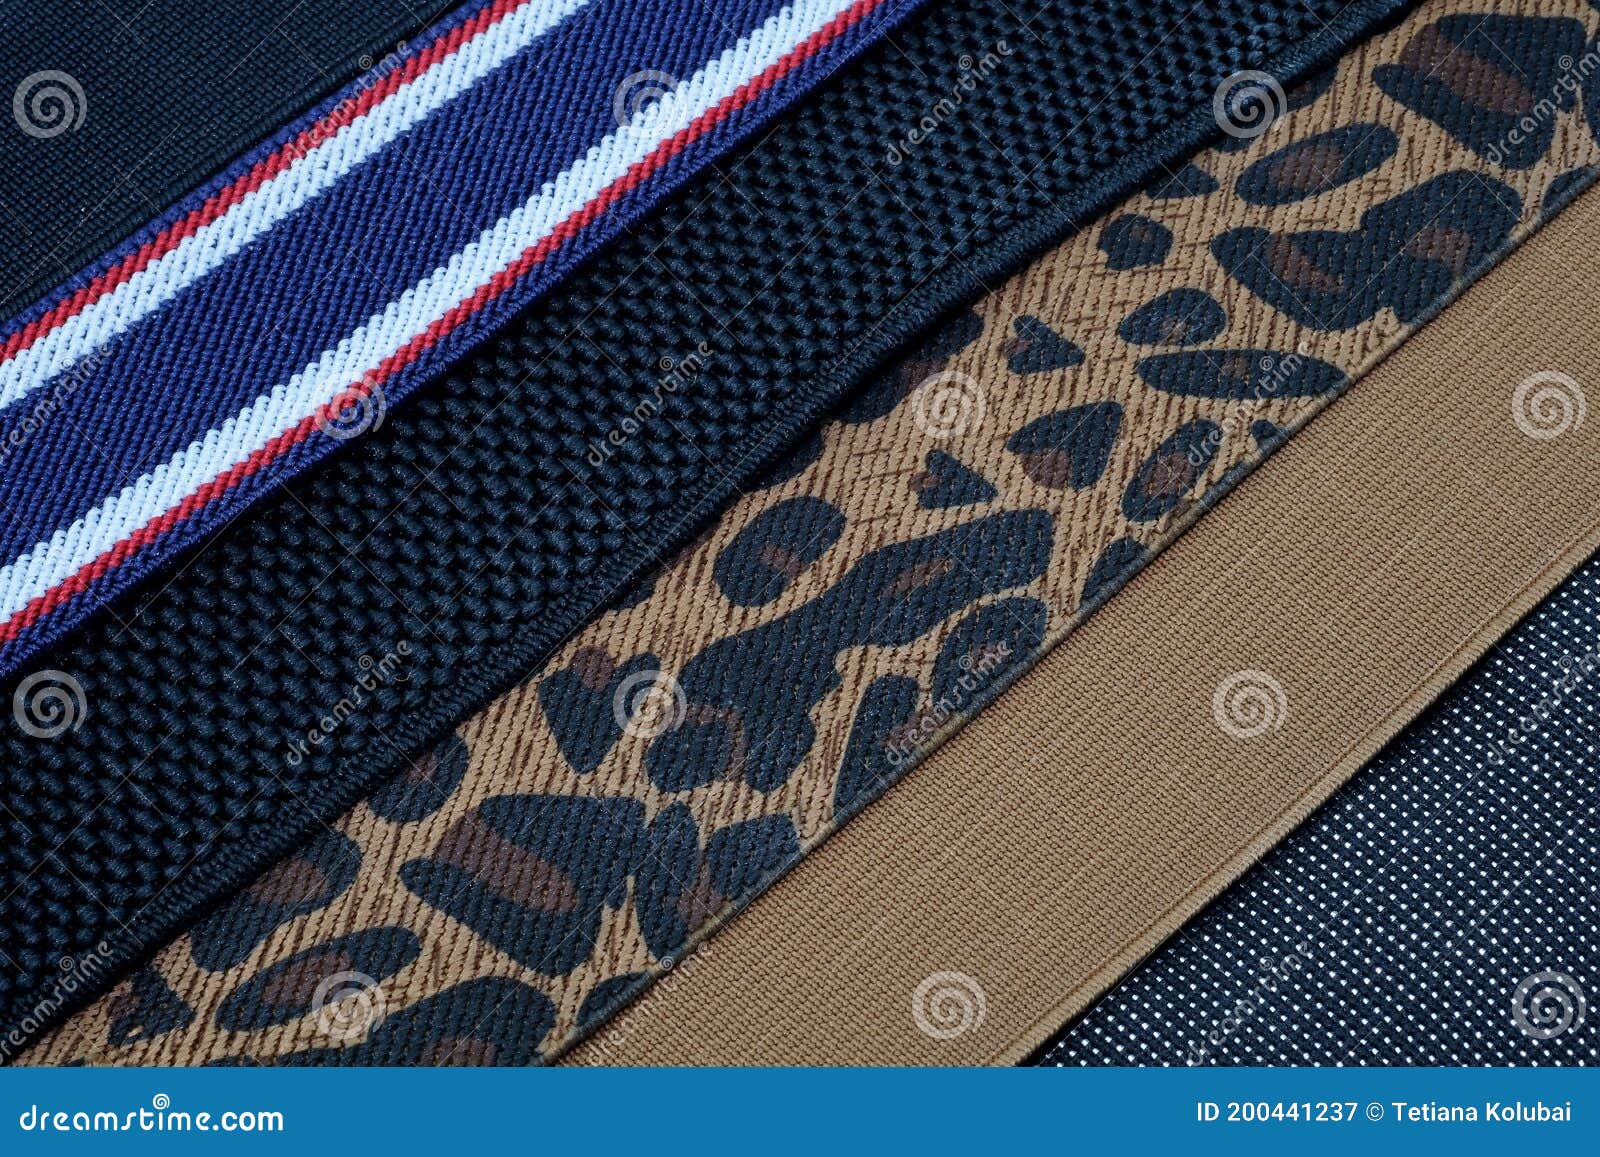 Elastic Band for Sewing Clothes. Sewing Rubber Band. Elastic for Clothing  Texture Background. Stock Image - Image of craft, housework: 144494799